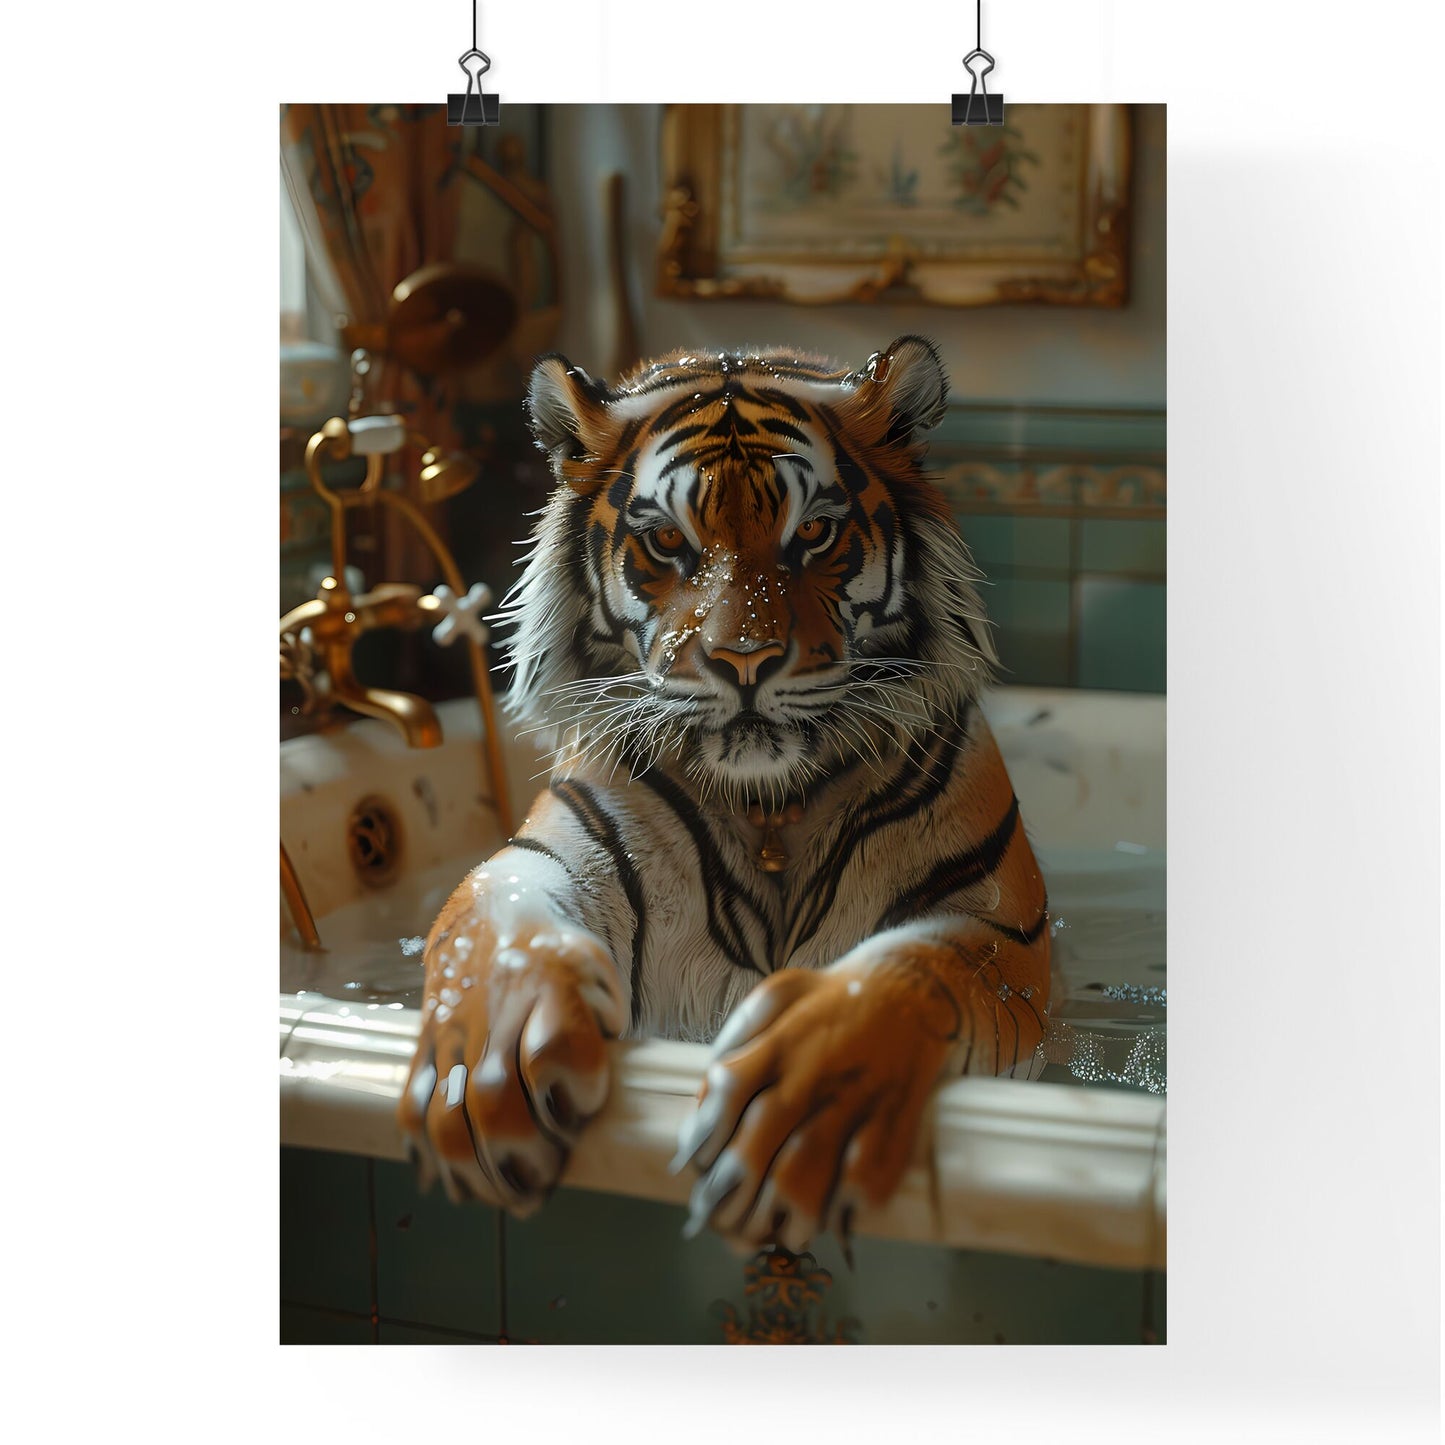 Whimsical Transgressive Art of a Tiger in a Bathtub, Storybook Illustration, HD, Ambient Occlusion Default Title